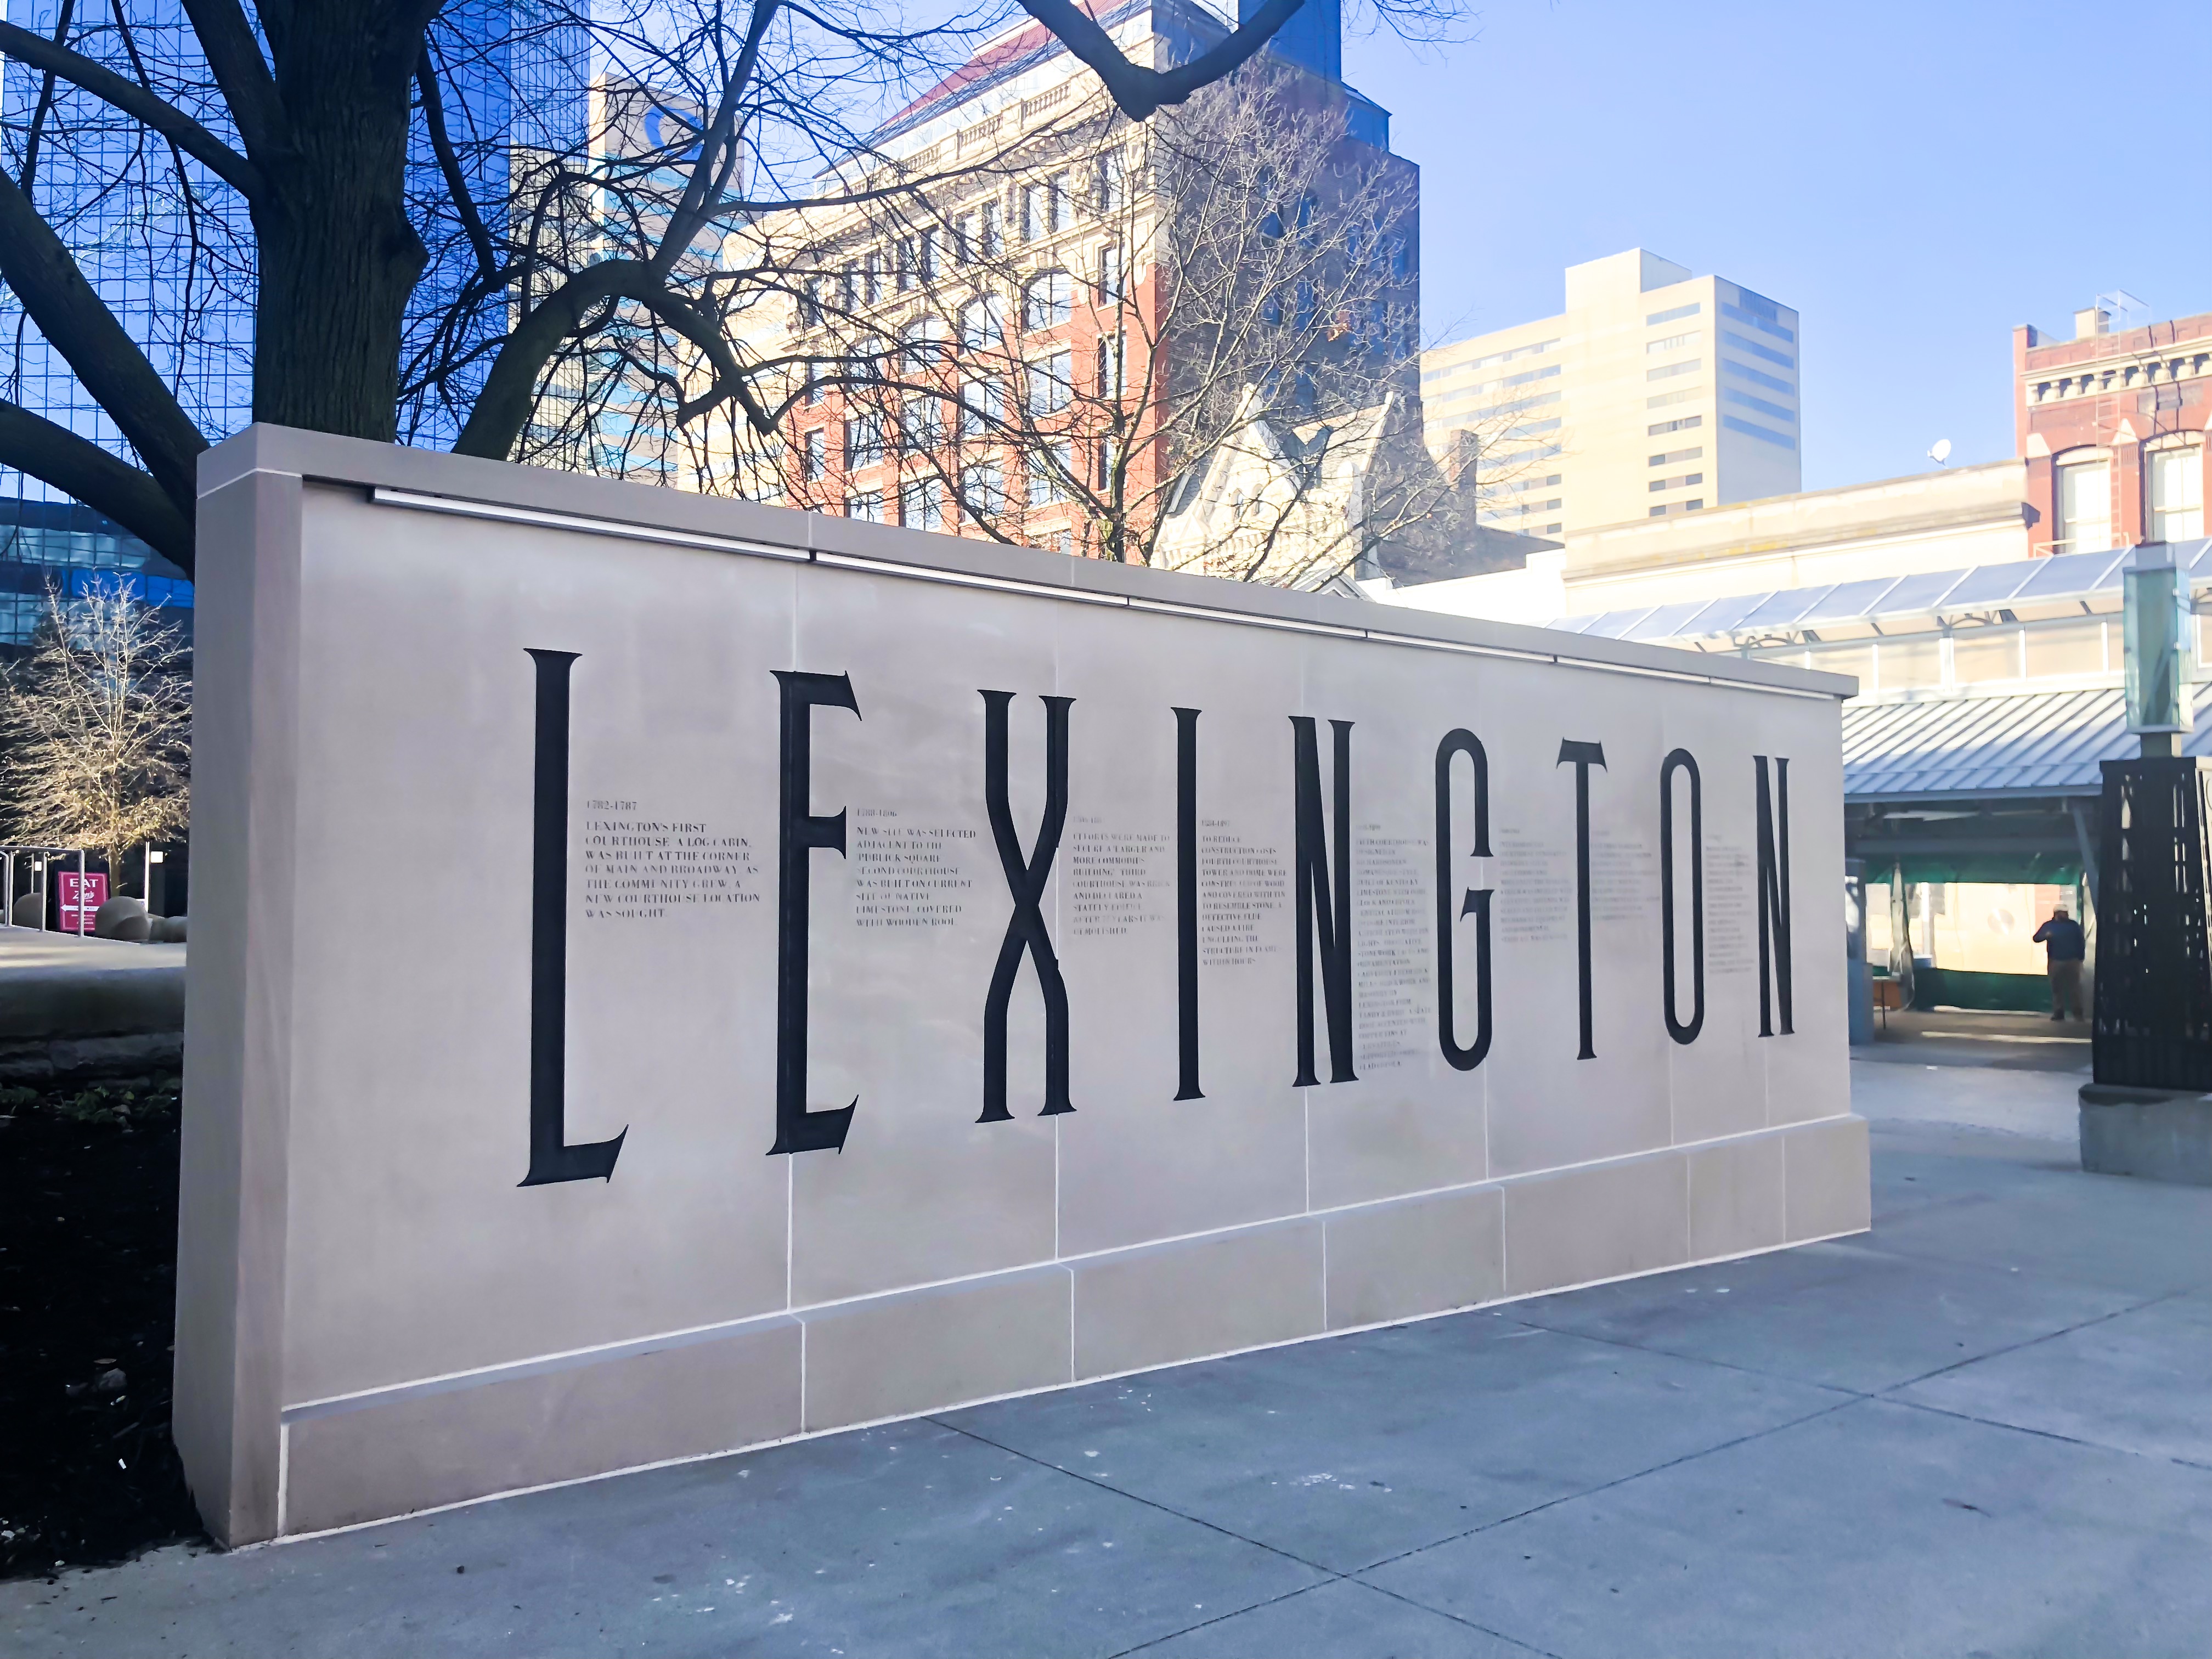 I'm Whitney, and I'm the founder of Fabulous in Fayette, which is a blog that celebrates the fabulous city of Lexington, the great state of Kentucky, and Southern living. #sharethelex #visitlex #lexingtonky #lexingtonkentucky #kentucky #travelky #betterinthebluegrass